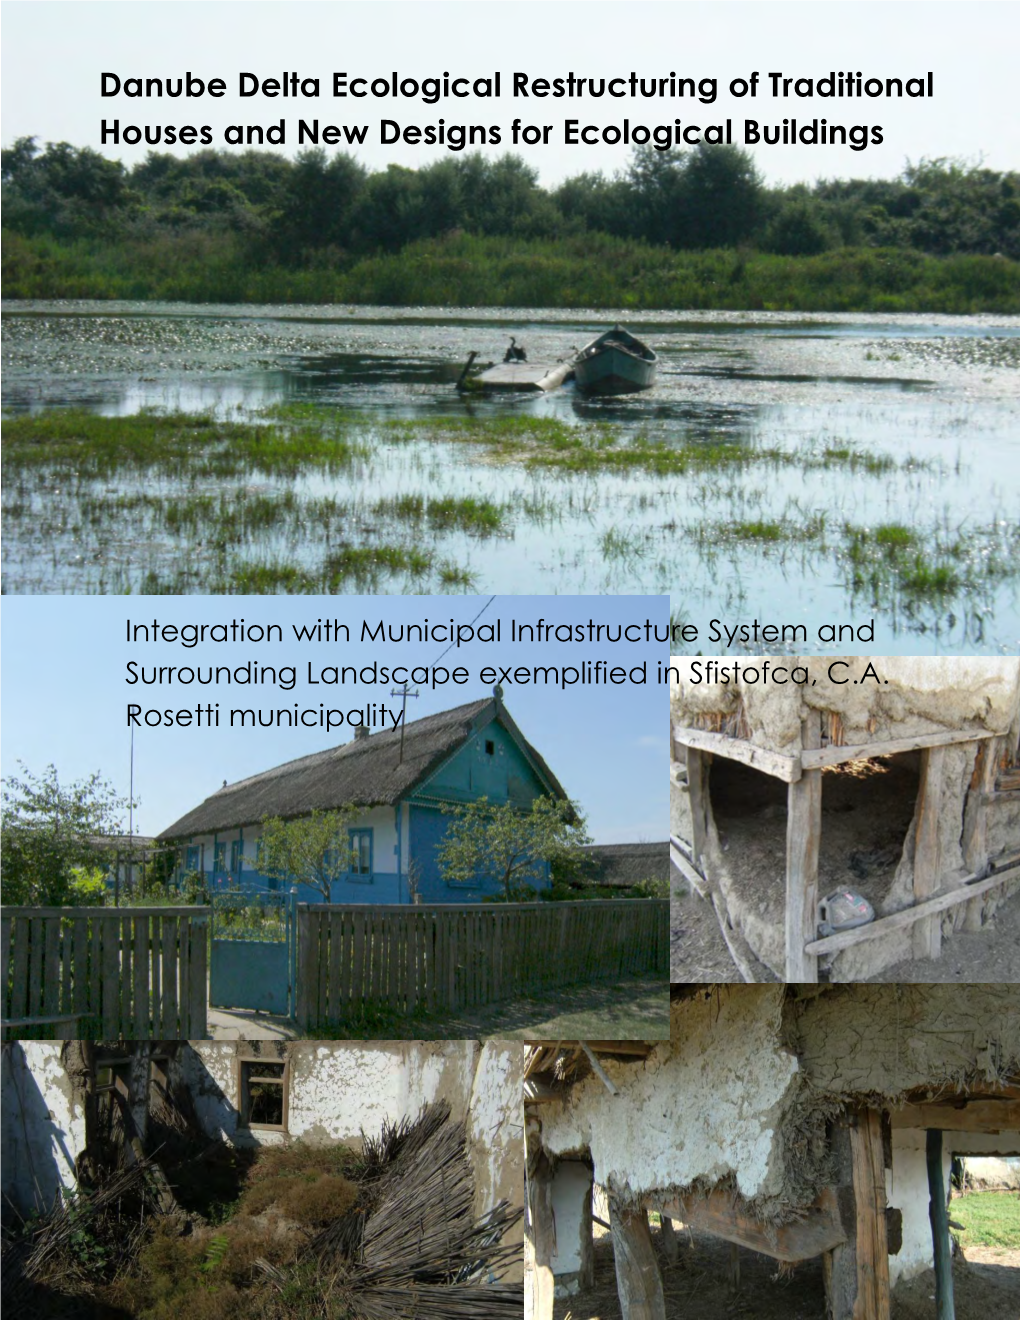 Danube Delta Ecological Restructuring of Traditional Houses and New Designs for Ecological Buildings